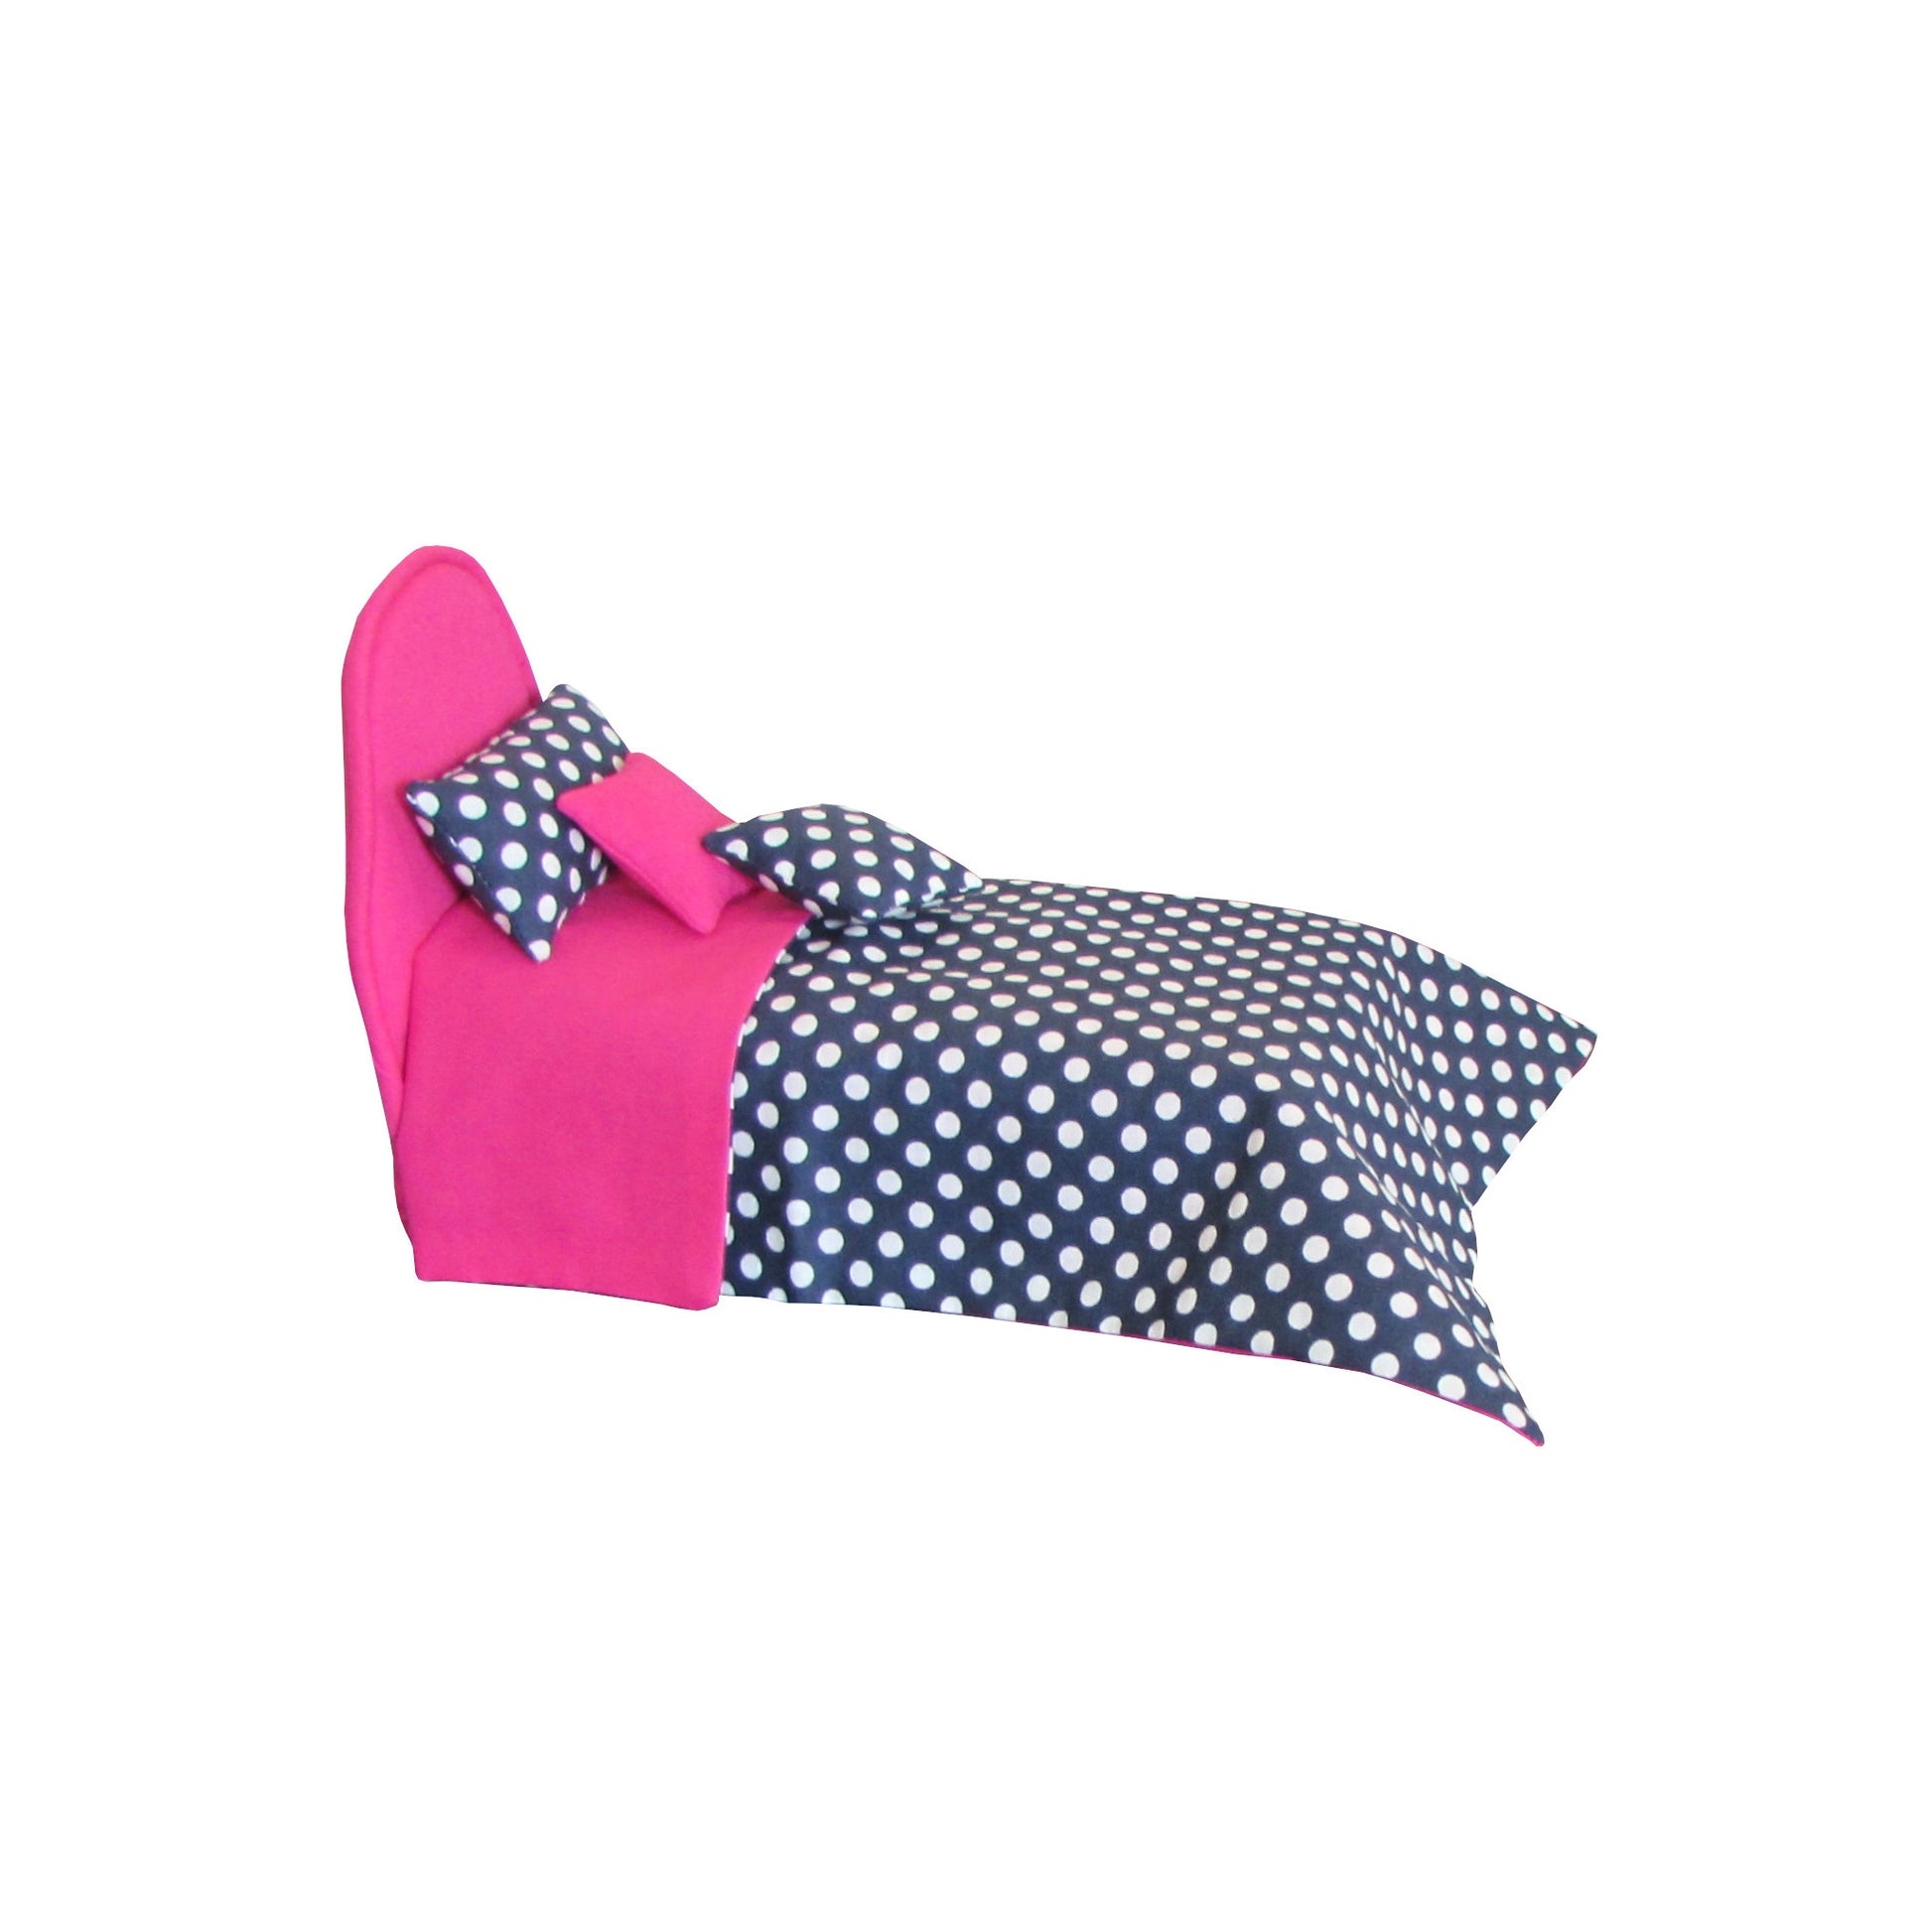 Bright Pink Doll Bed and Dots Dark Blue Doll Bedding for 6.5-inch dolls